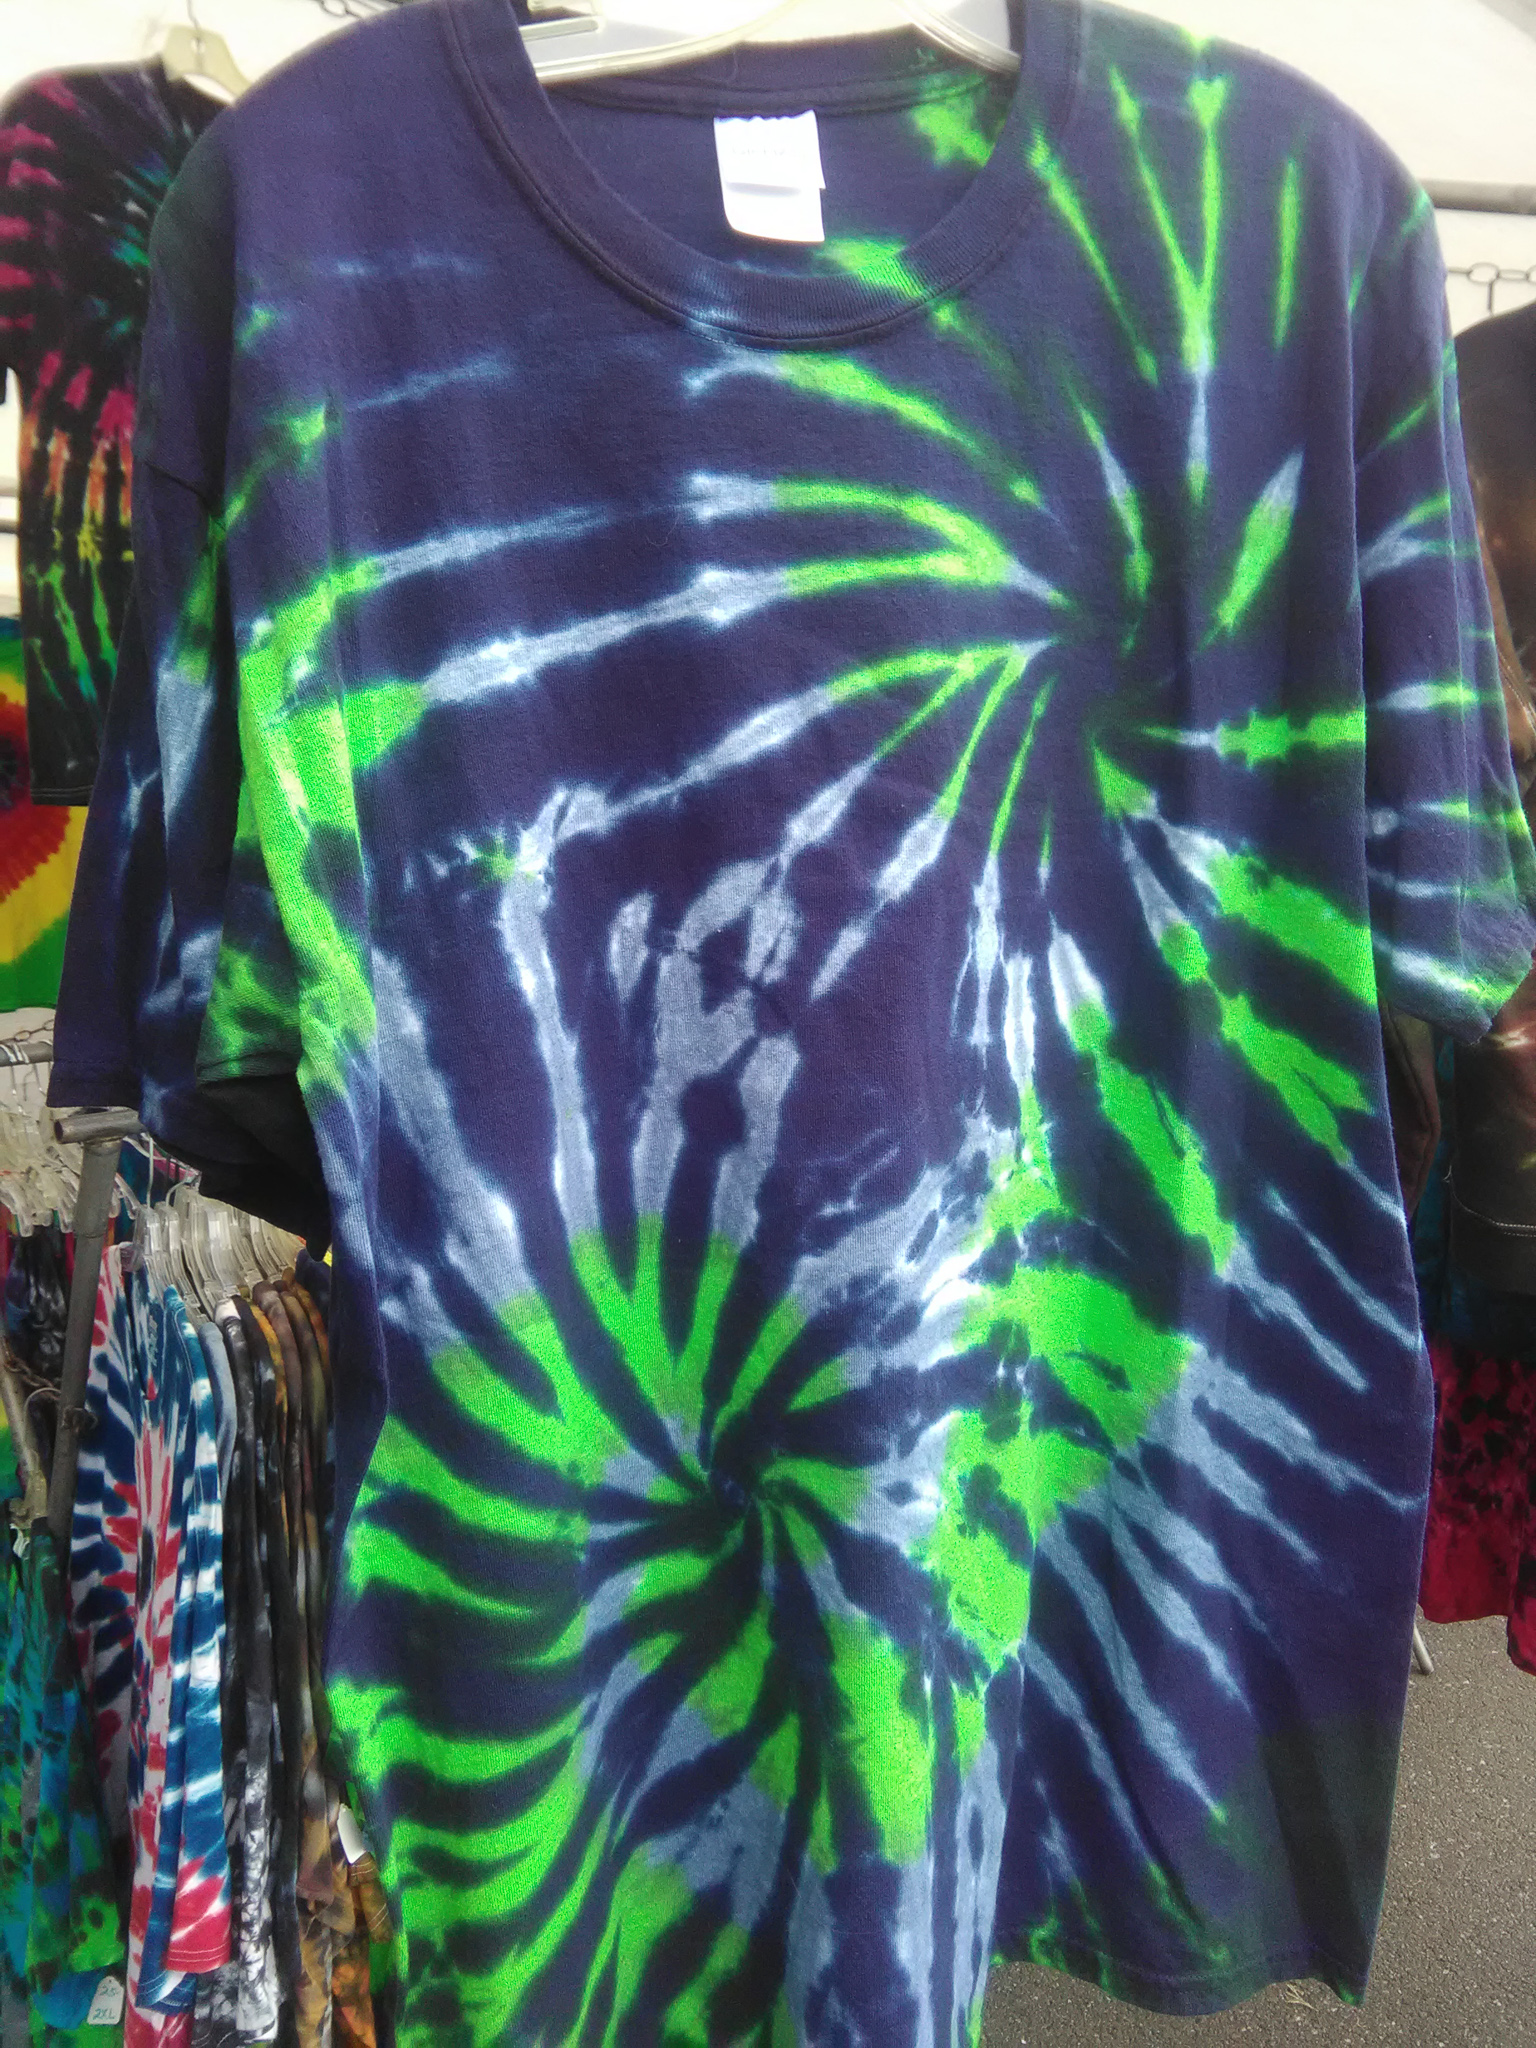 The double hawk spiral tie-dyed tee could start the wave just about anywhere!